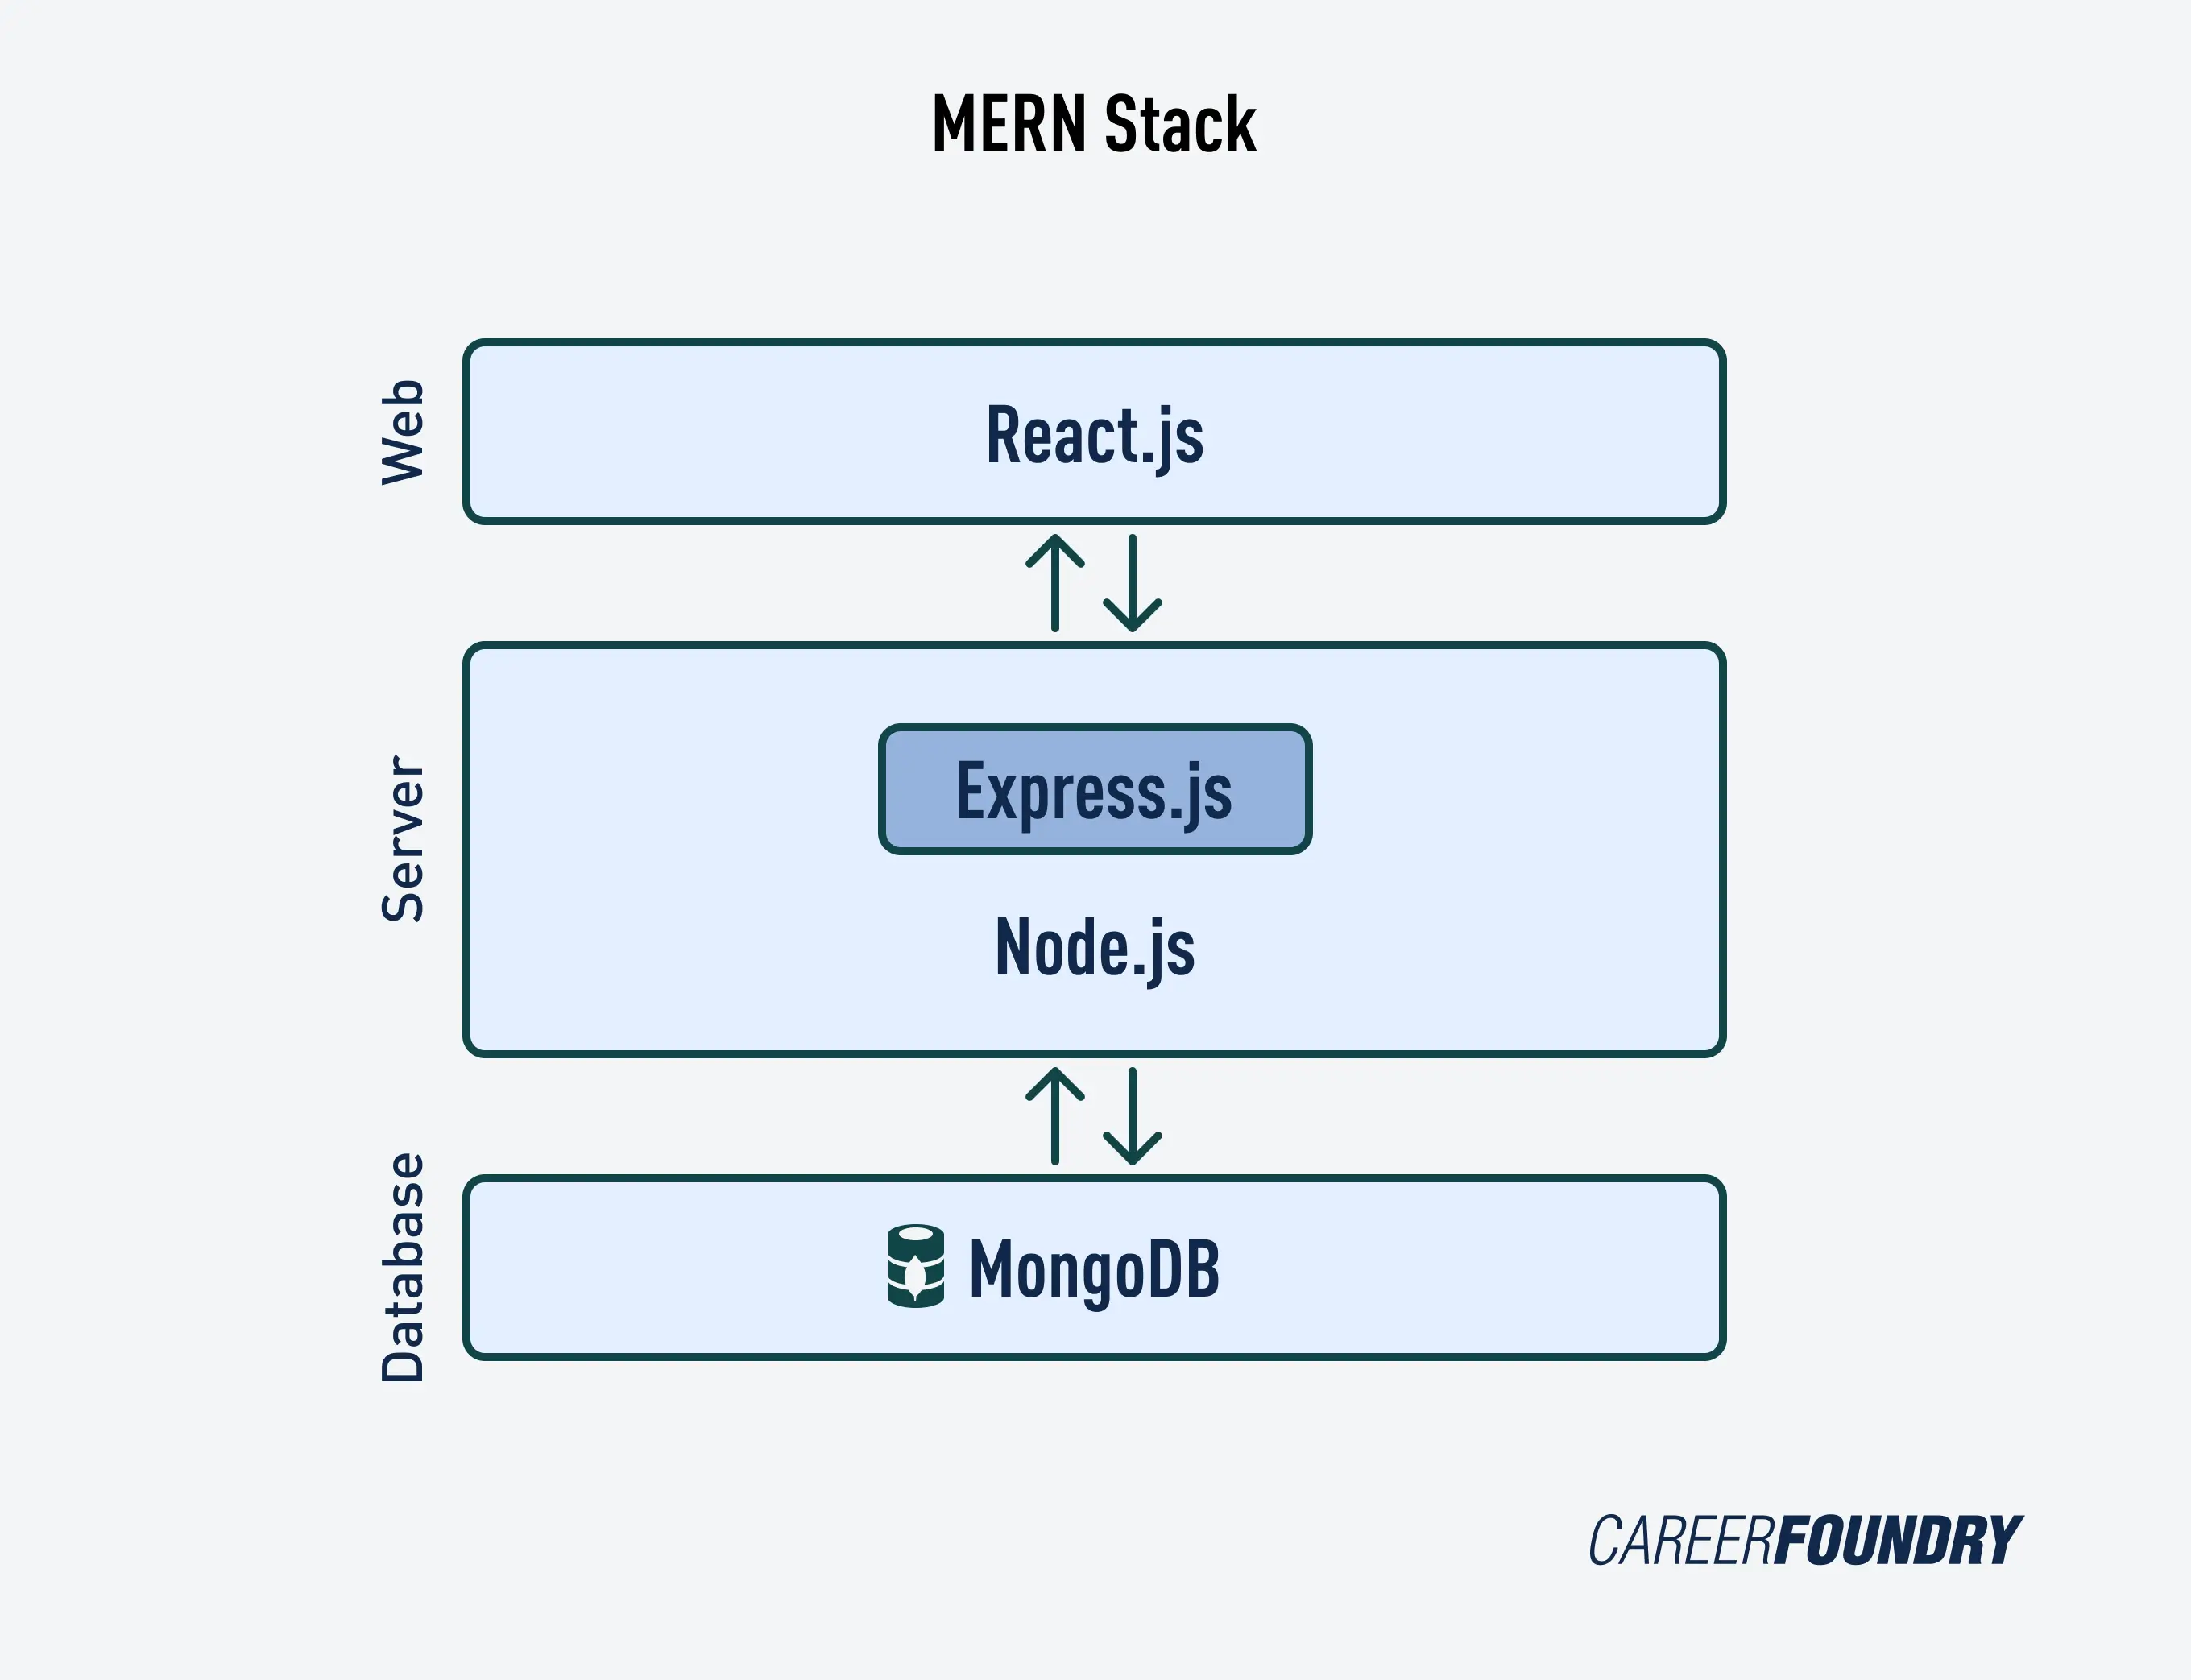 A graphic illustrating the MERN Stack technologies: React, Express, Node, and MongoDB.